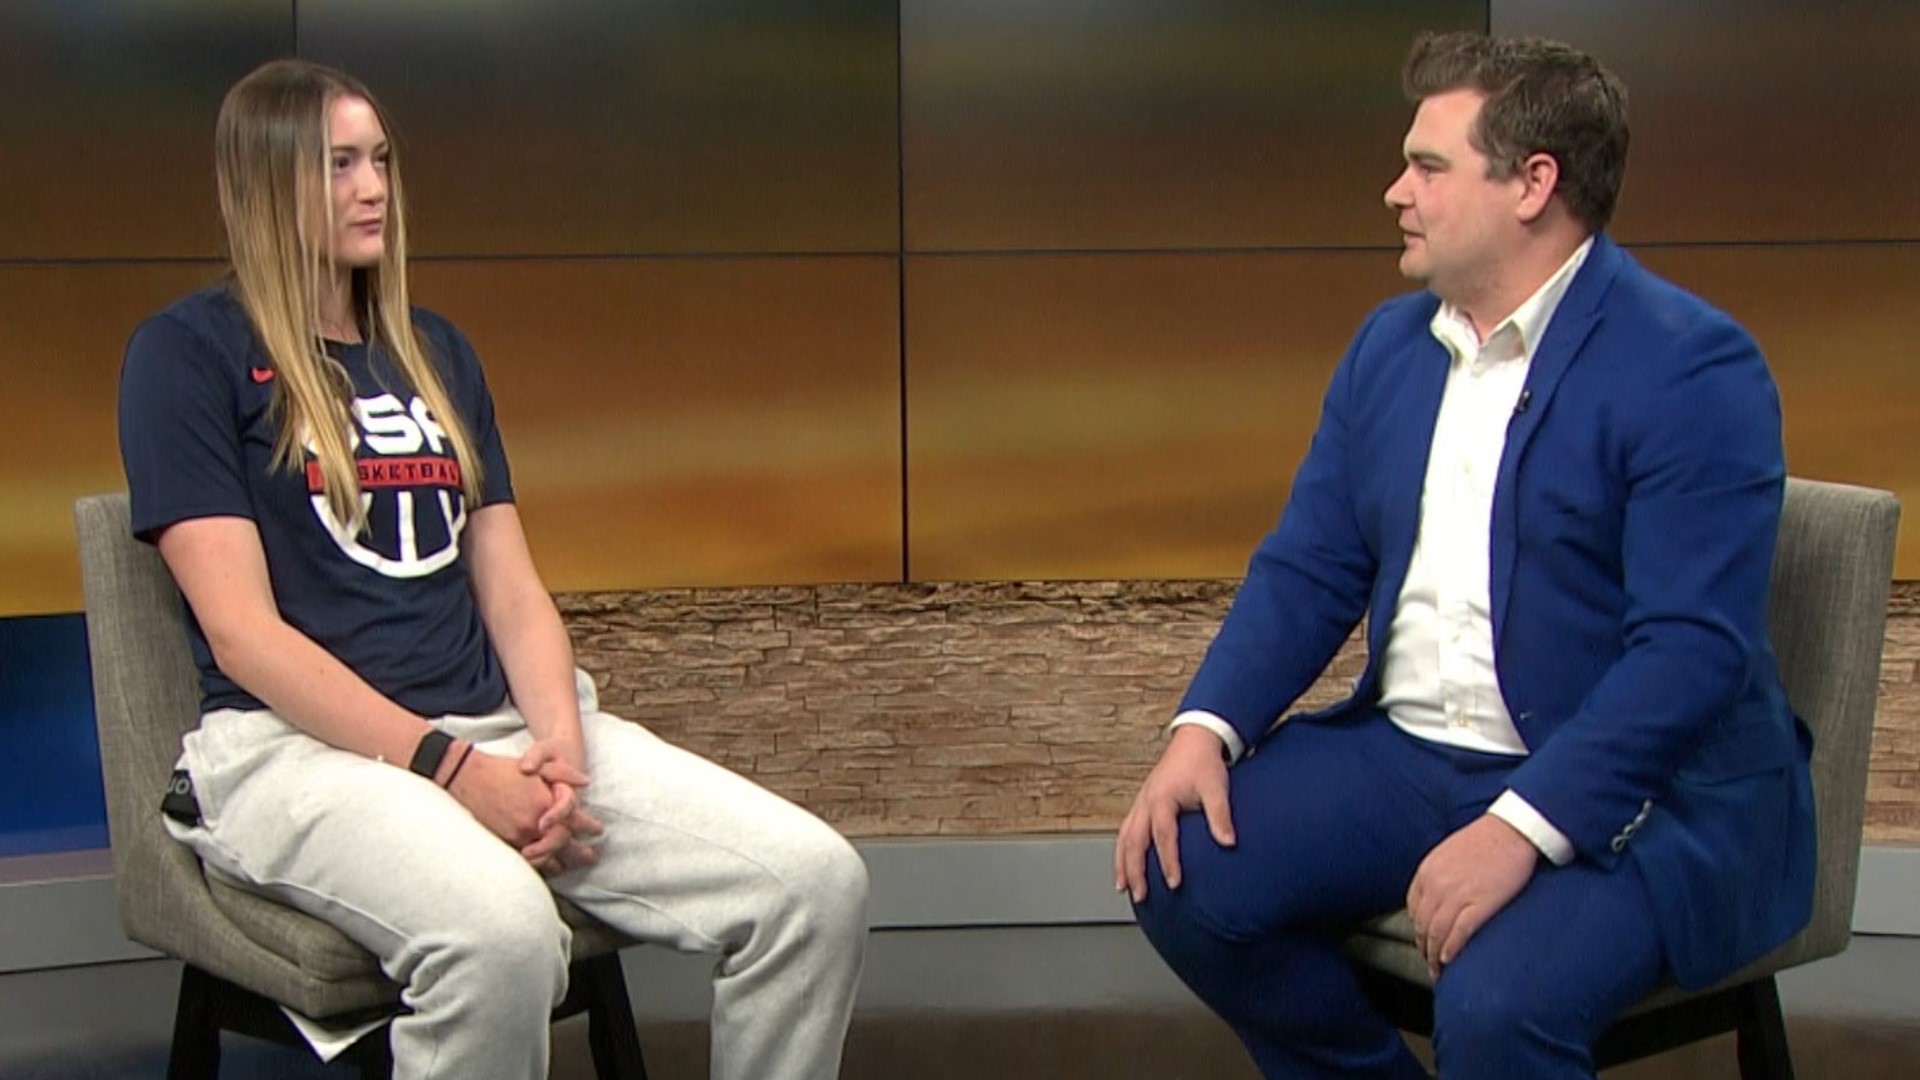 WTOL 11's Tyler Seggerman sat down with Grace Vansloot to talk the next step in her sports career.